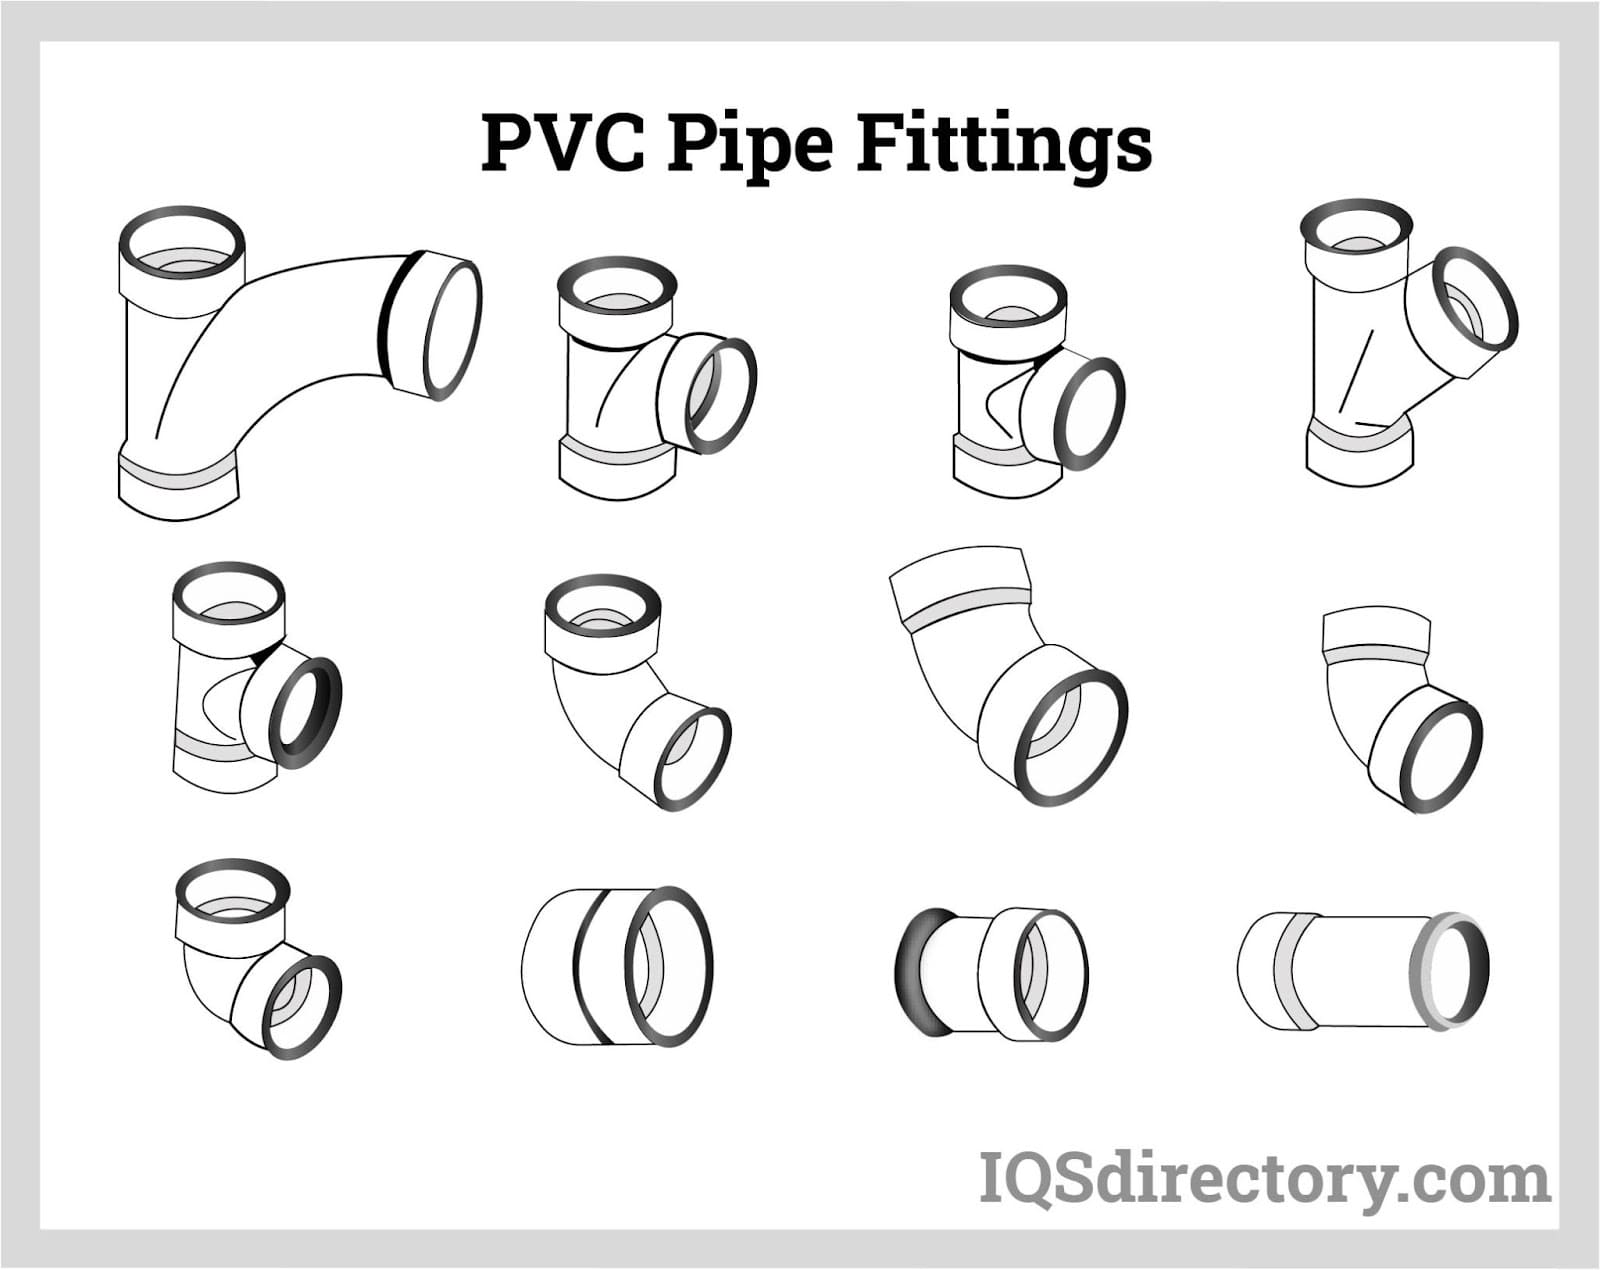 TYPES OF PIPE FITTINGS USED IN CONSTRUCTION, PLUMBING